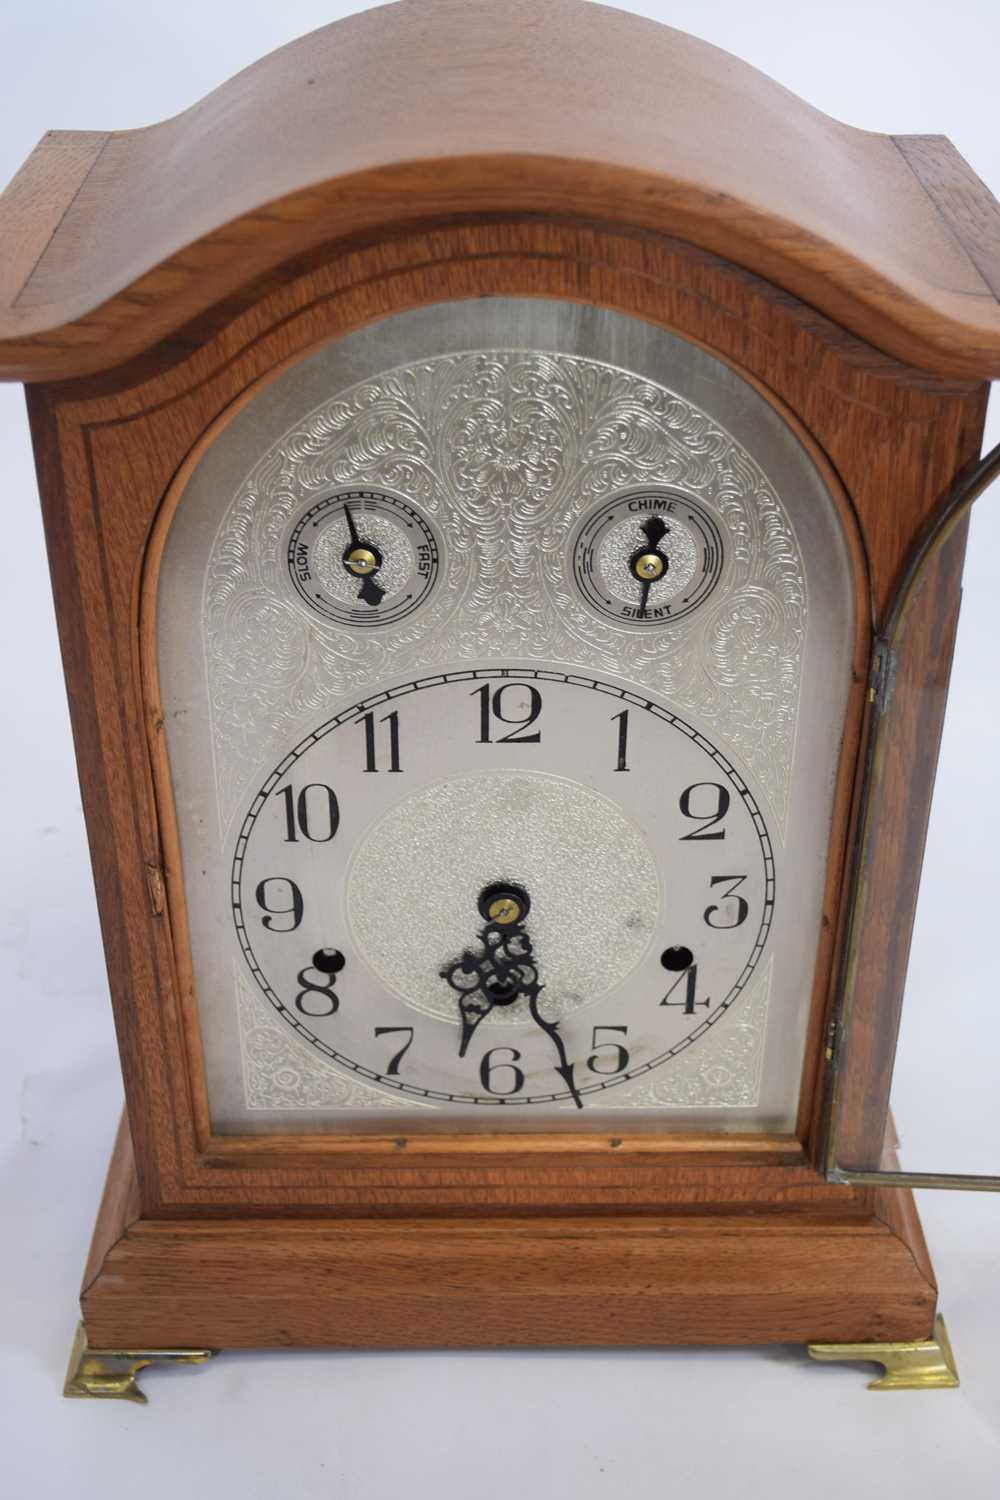 20th century German mantel clock, silvered dial with Arabic numerals, strike silent feature and a - Image 2 of 4